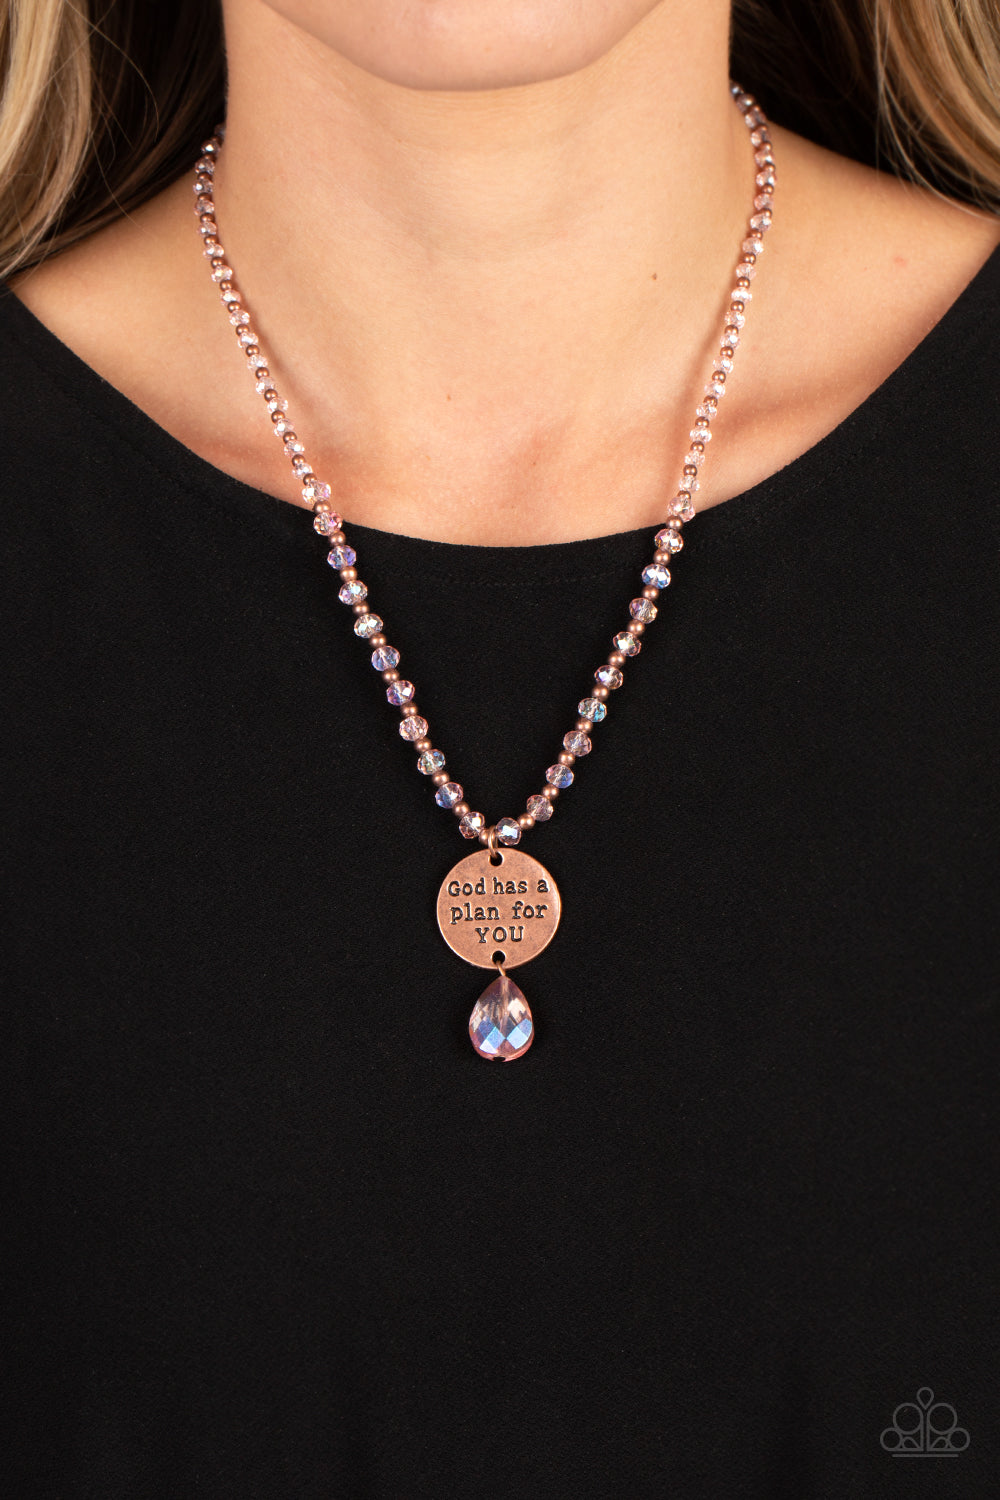 Priceless Plan - Copper Beads, Pink Faceted Beads, "God has a plan for YOU" Pendant Paparazzi Necklace & matching earrings